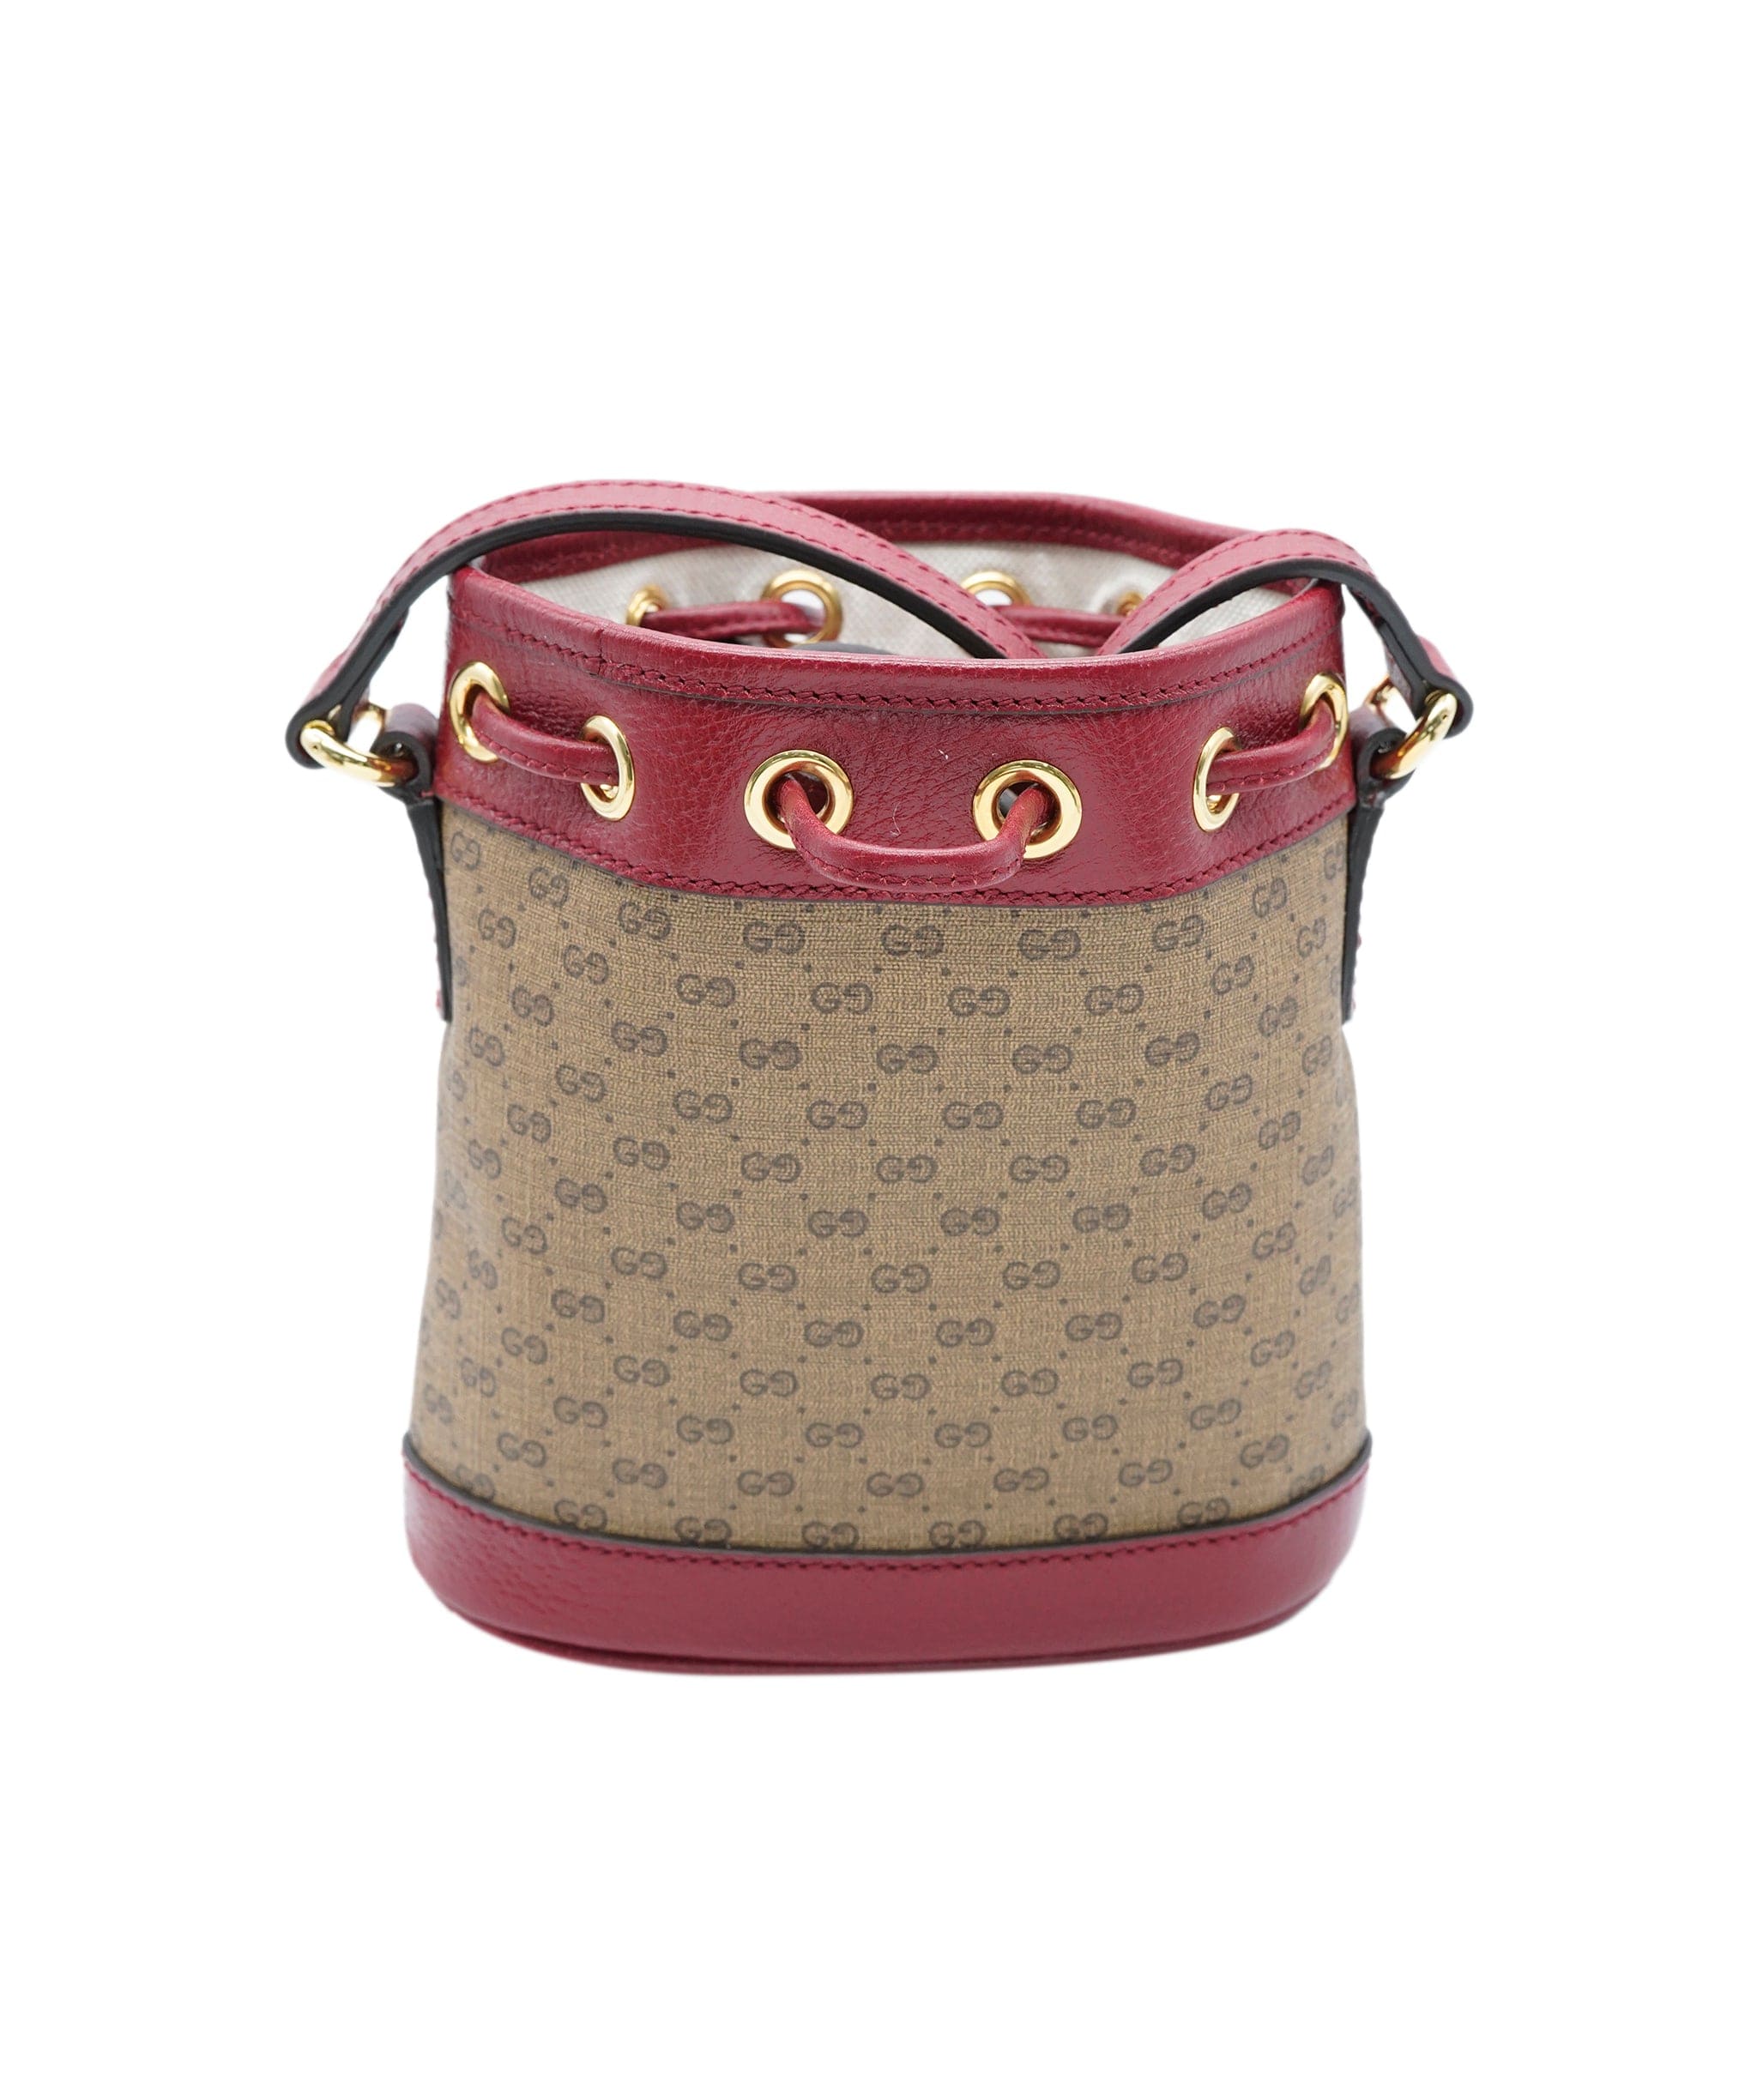 Gucci Gucci red, brown null 18.0cmX20.0cm AEC11248-FD